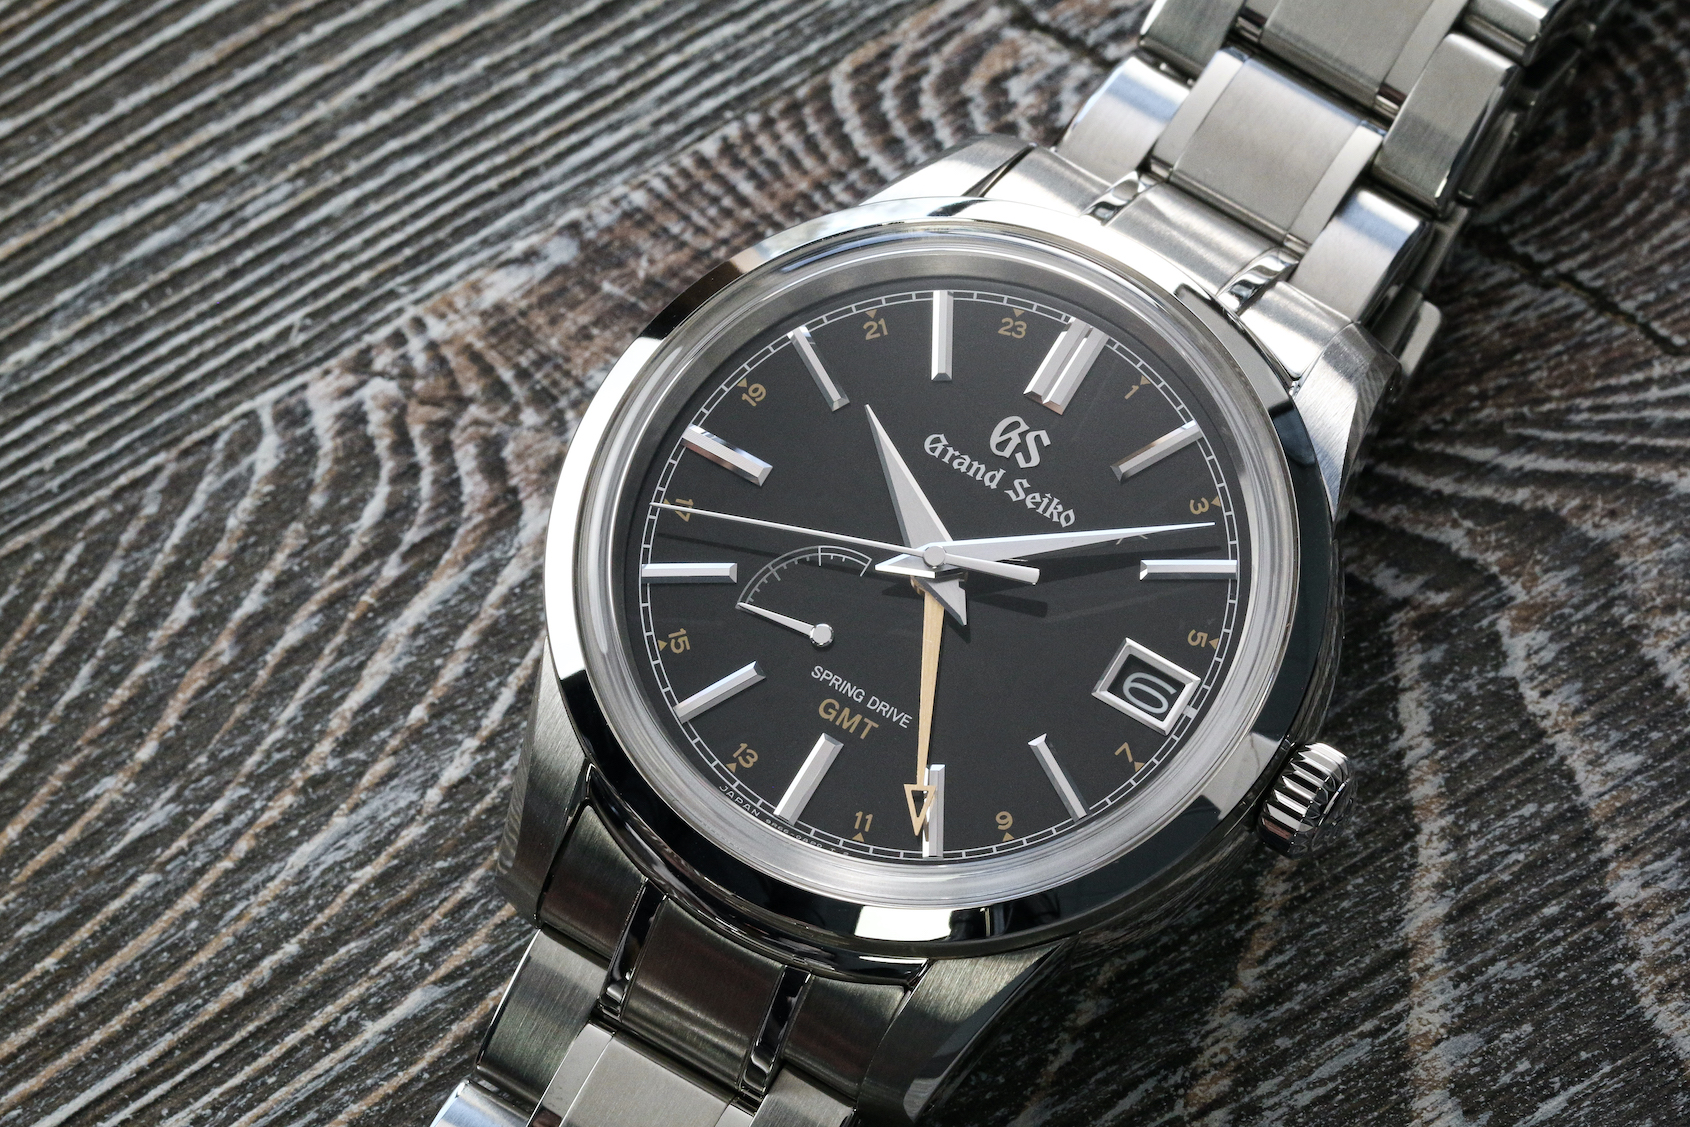 INTRODUCING: The Grand Seiko GMT Seasons Collection